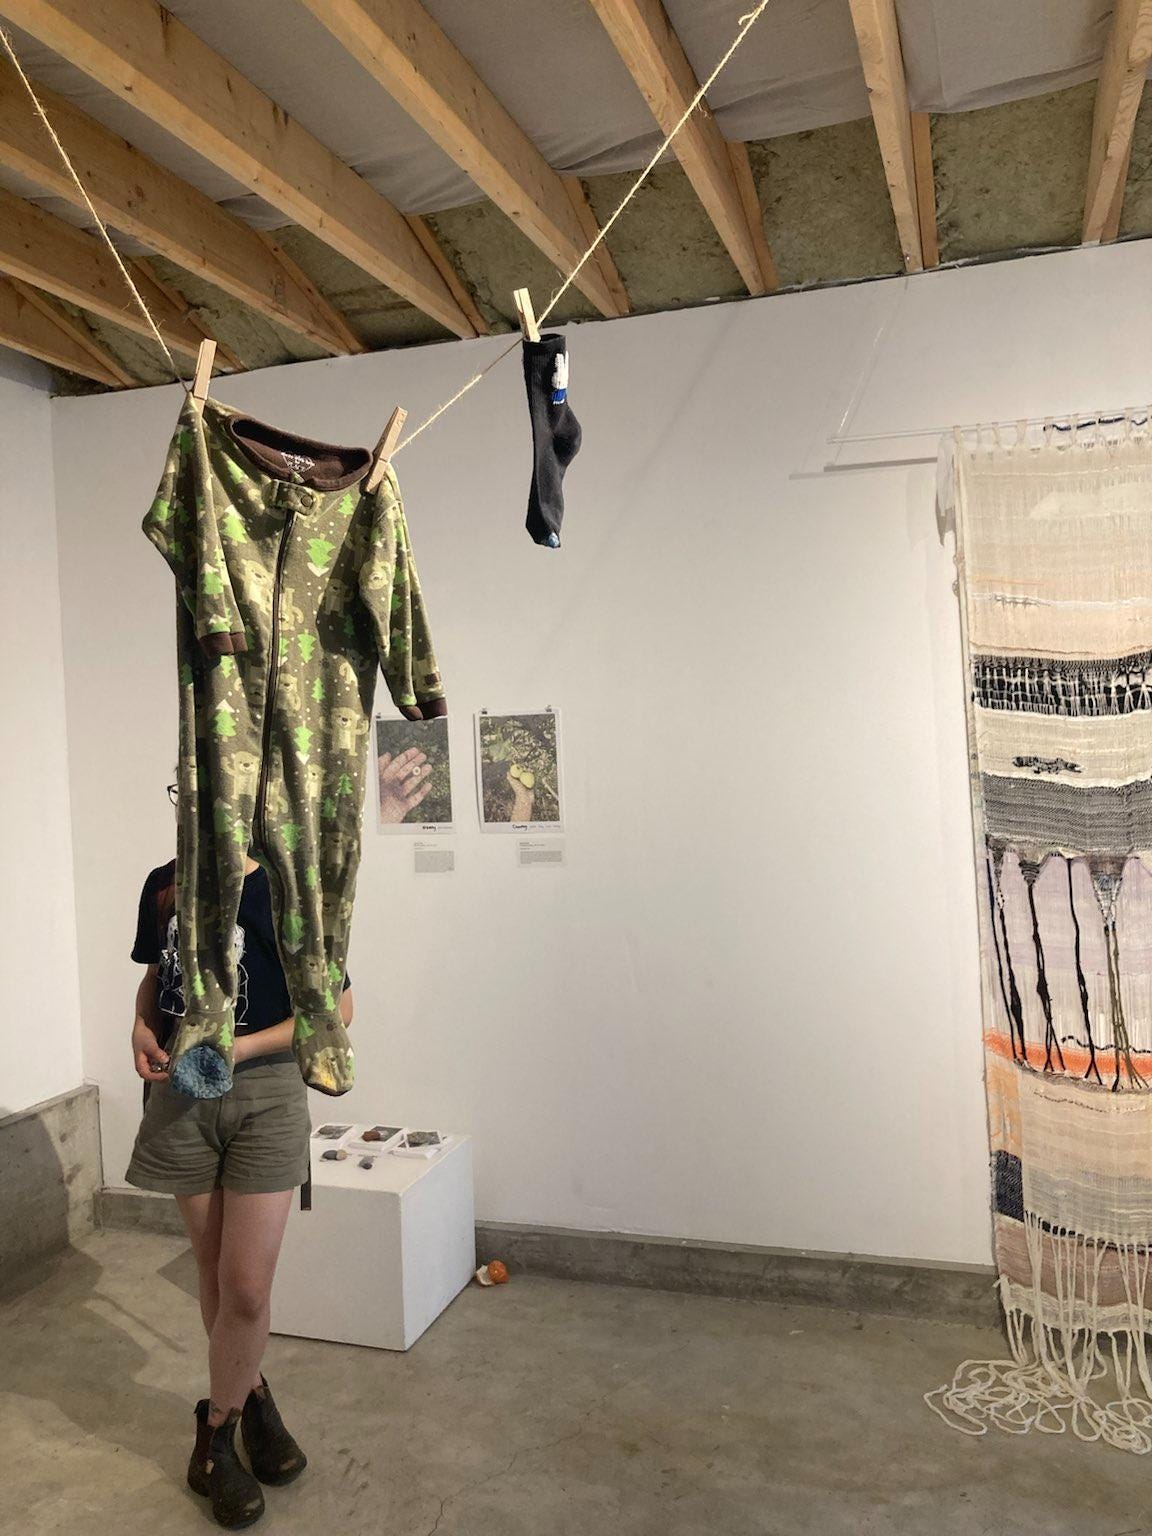 An image of Khanh's pieces at the exhibit. A forest green baby's onesie with 2 mending repairs on the toes are on a clothes line, accompanied by a black sock with Miffy the bunny on it.